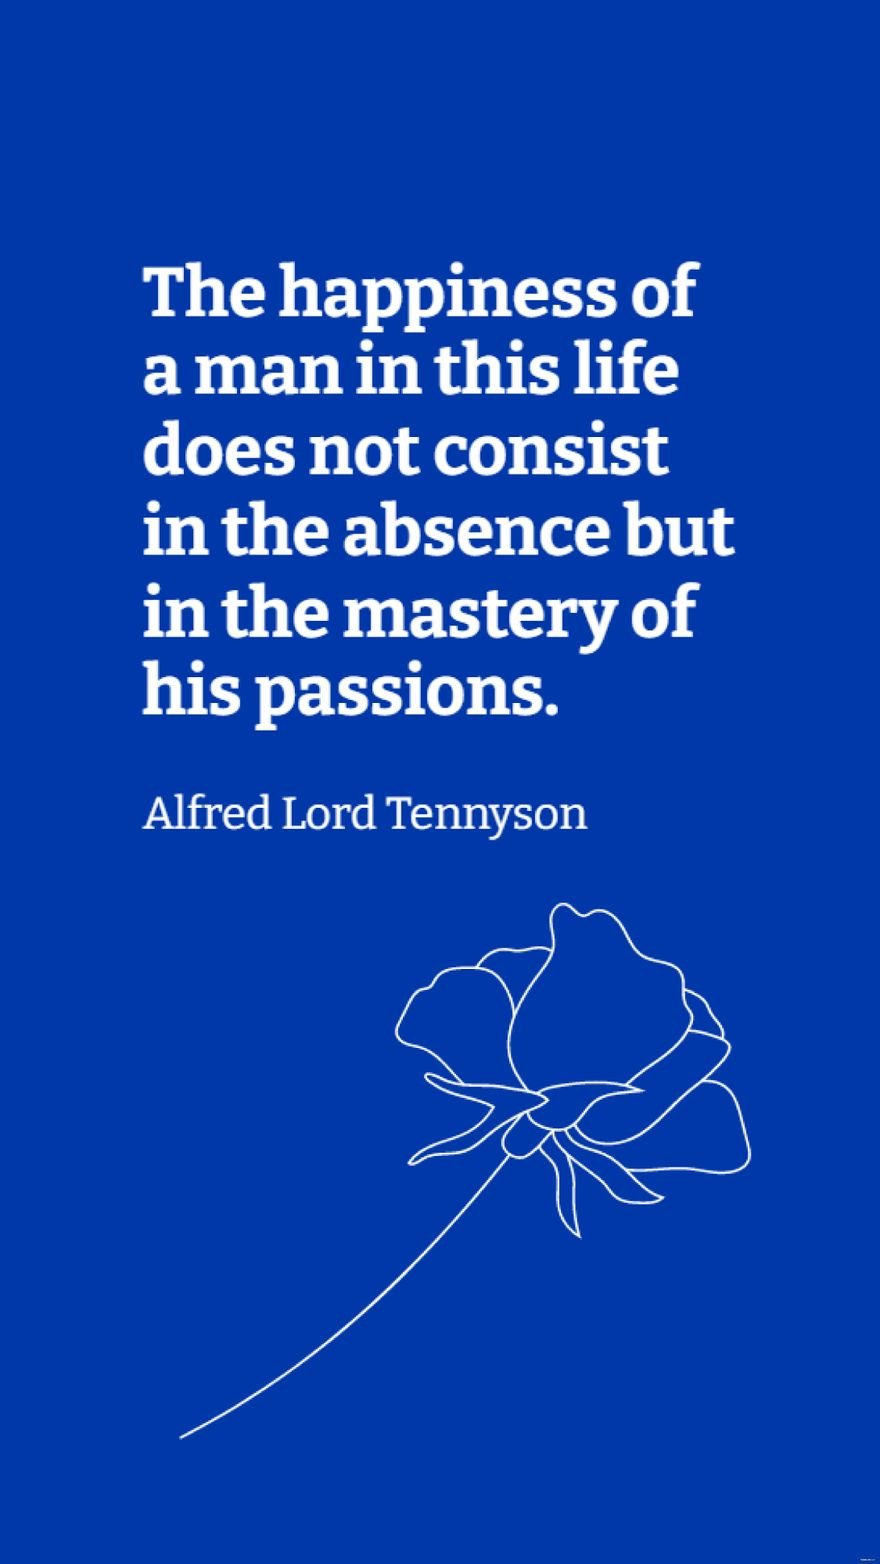 Alfred Lord Tennyson - The happiness of a man in this life does not consist in the absence but in the mastery of his passions.